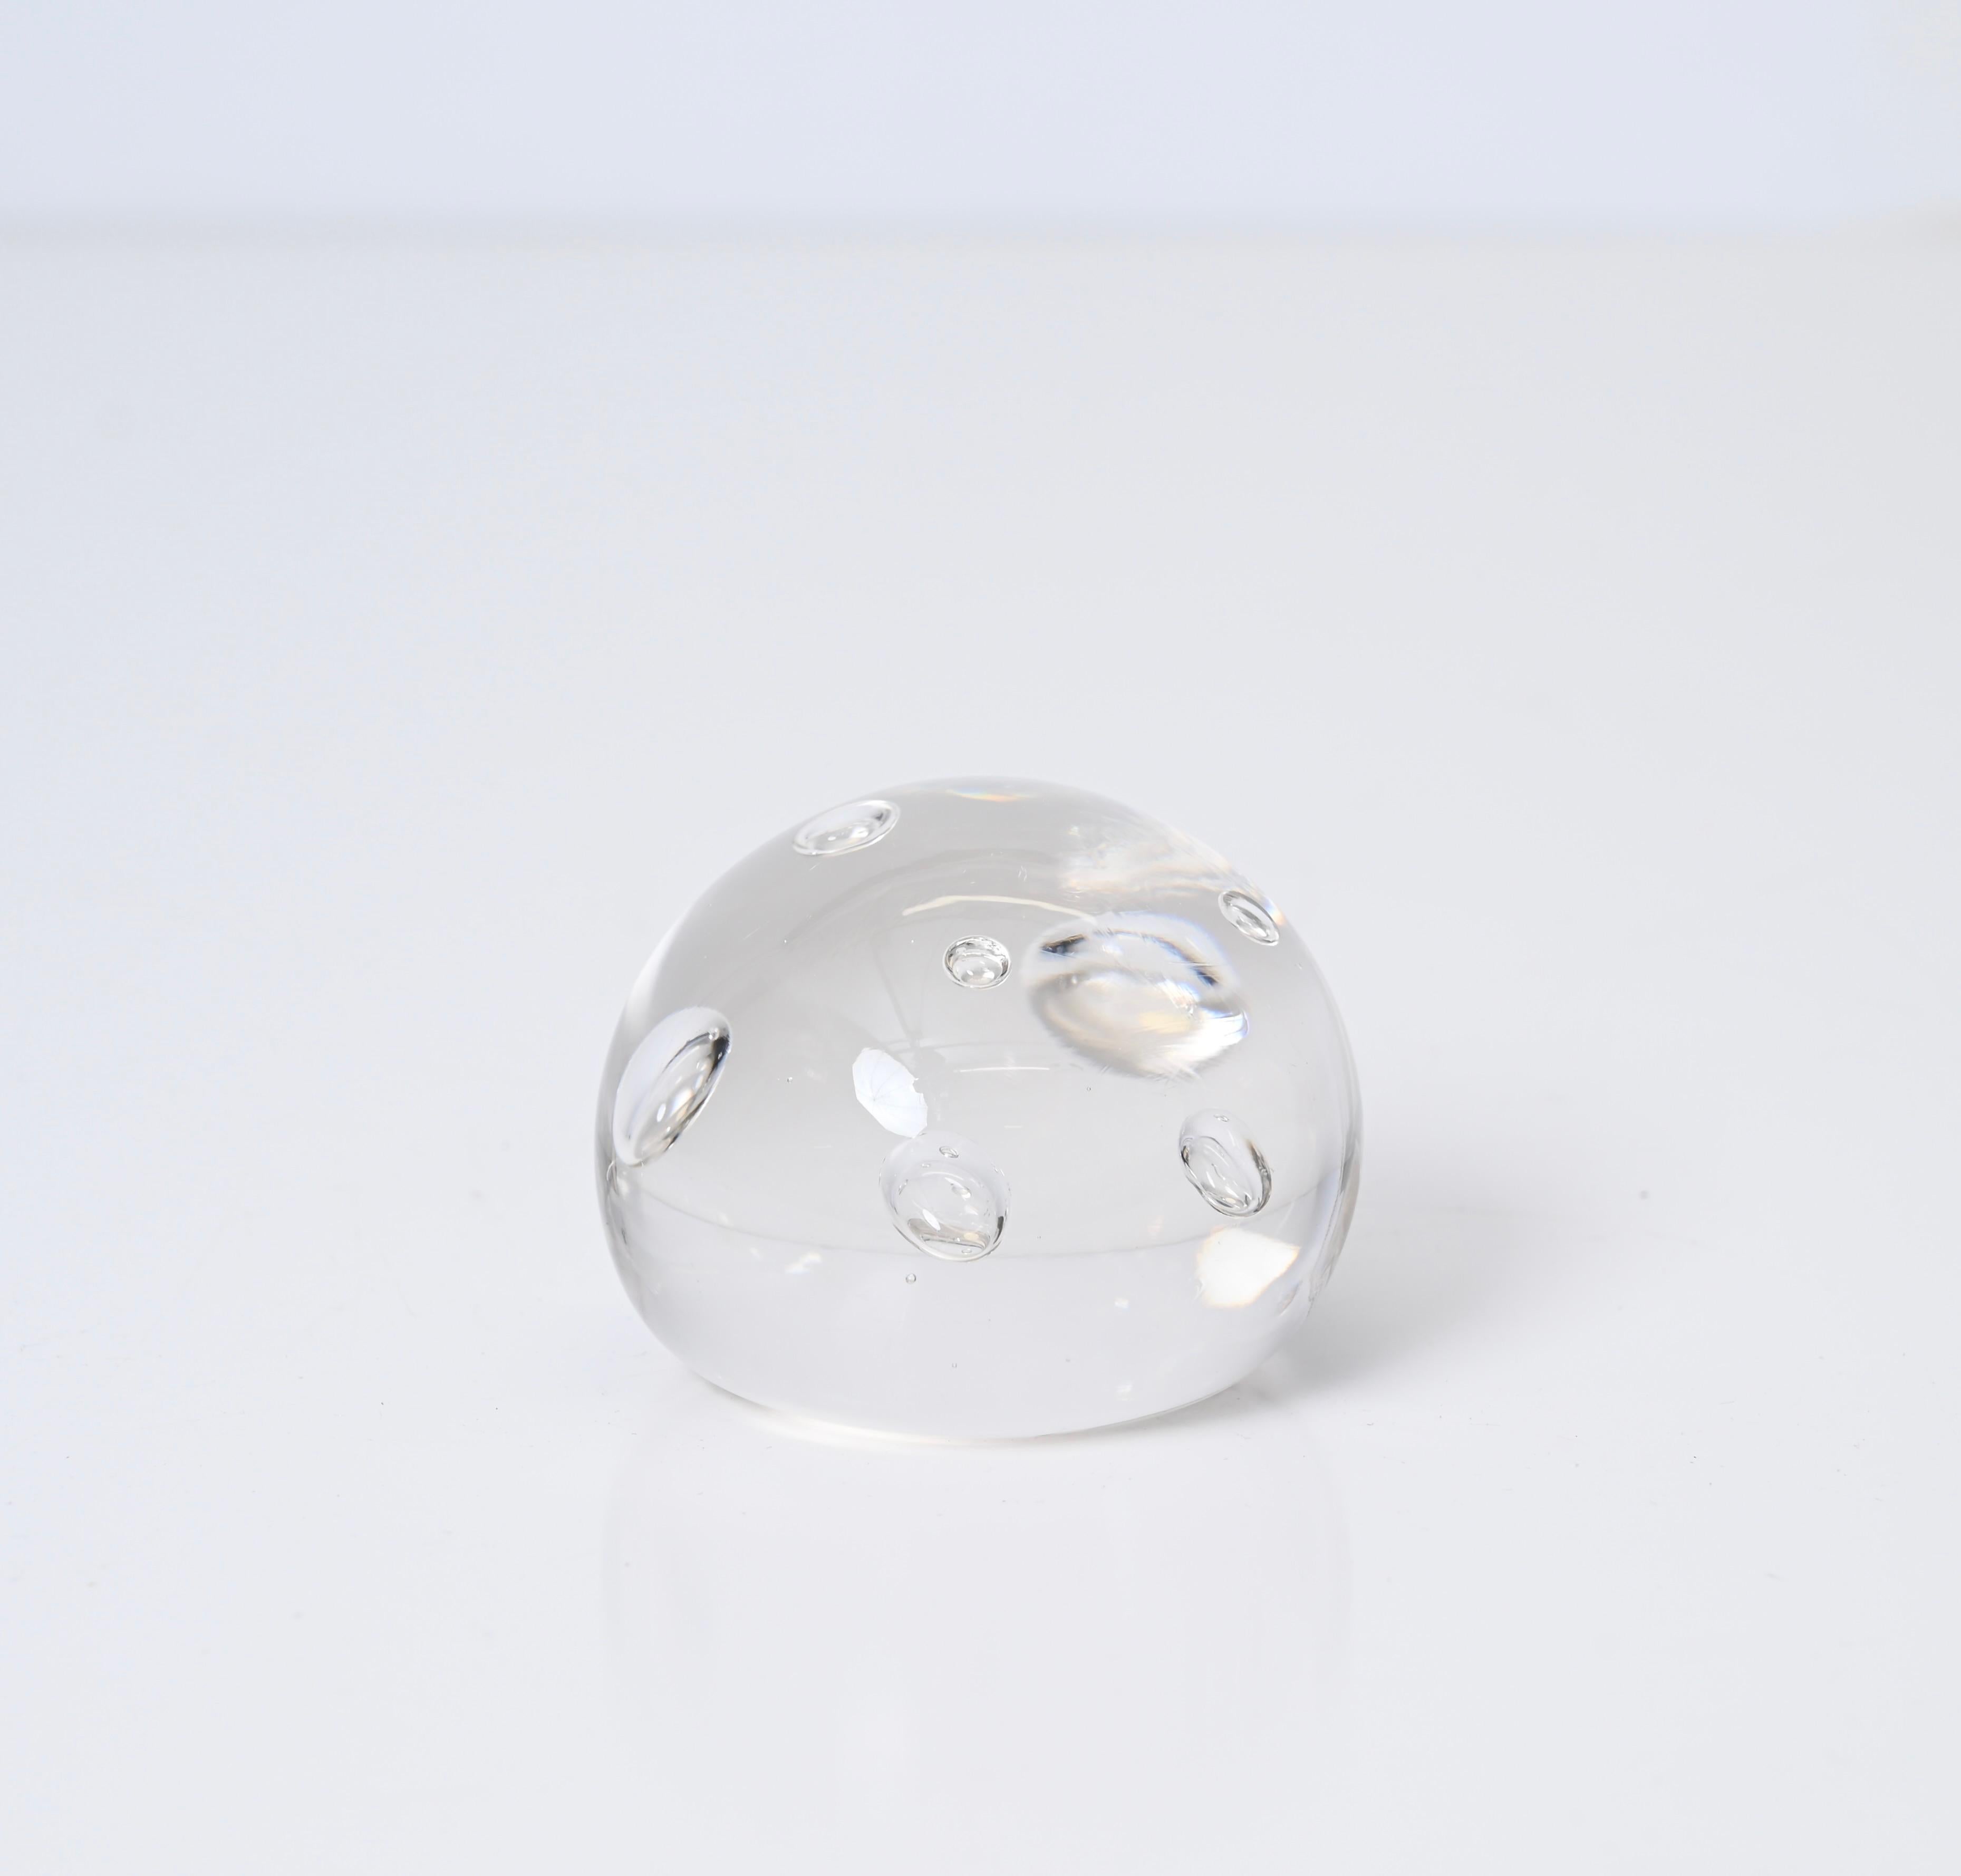 Hand-Crafted Signed A. Seguso Spherical Paperweight in Murano Bubble Glass, Italy 1960s For Sale